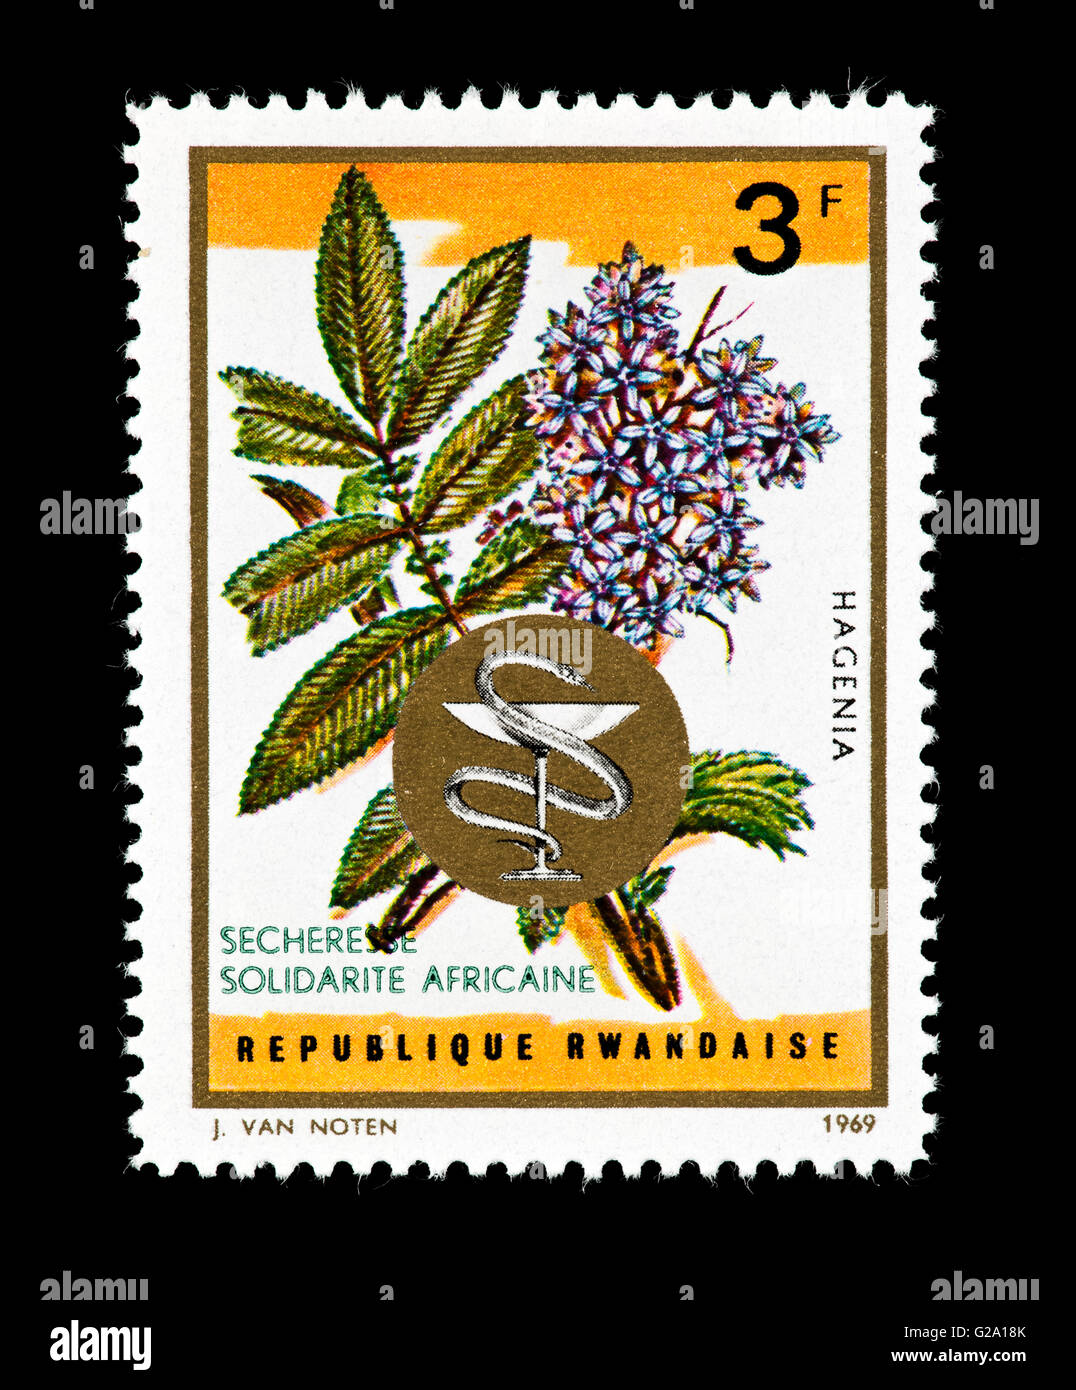 Postage stamp from Rwanda depicting Hagenia abyssinica, medicinal tree from Africa, and health emblem Stock Photo